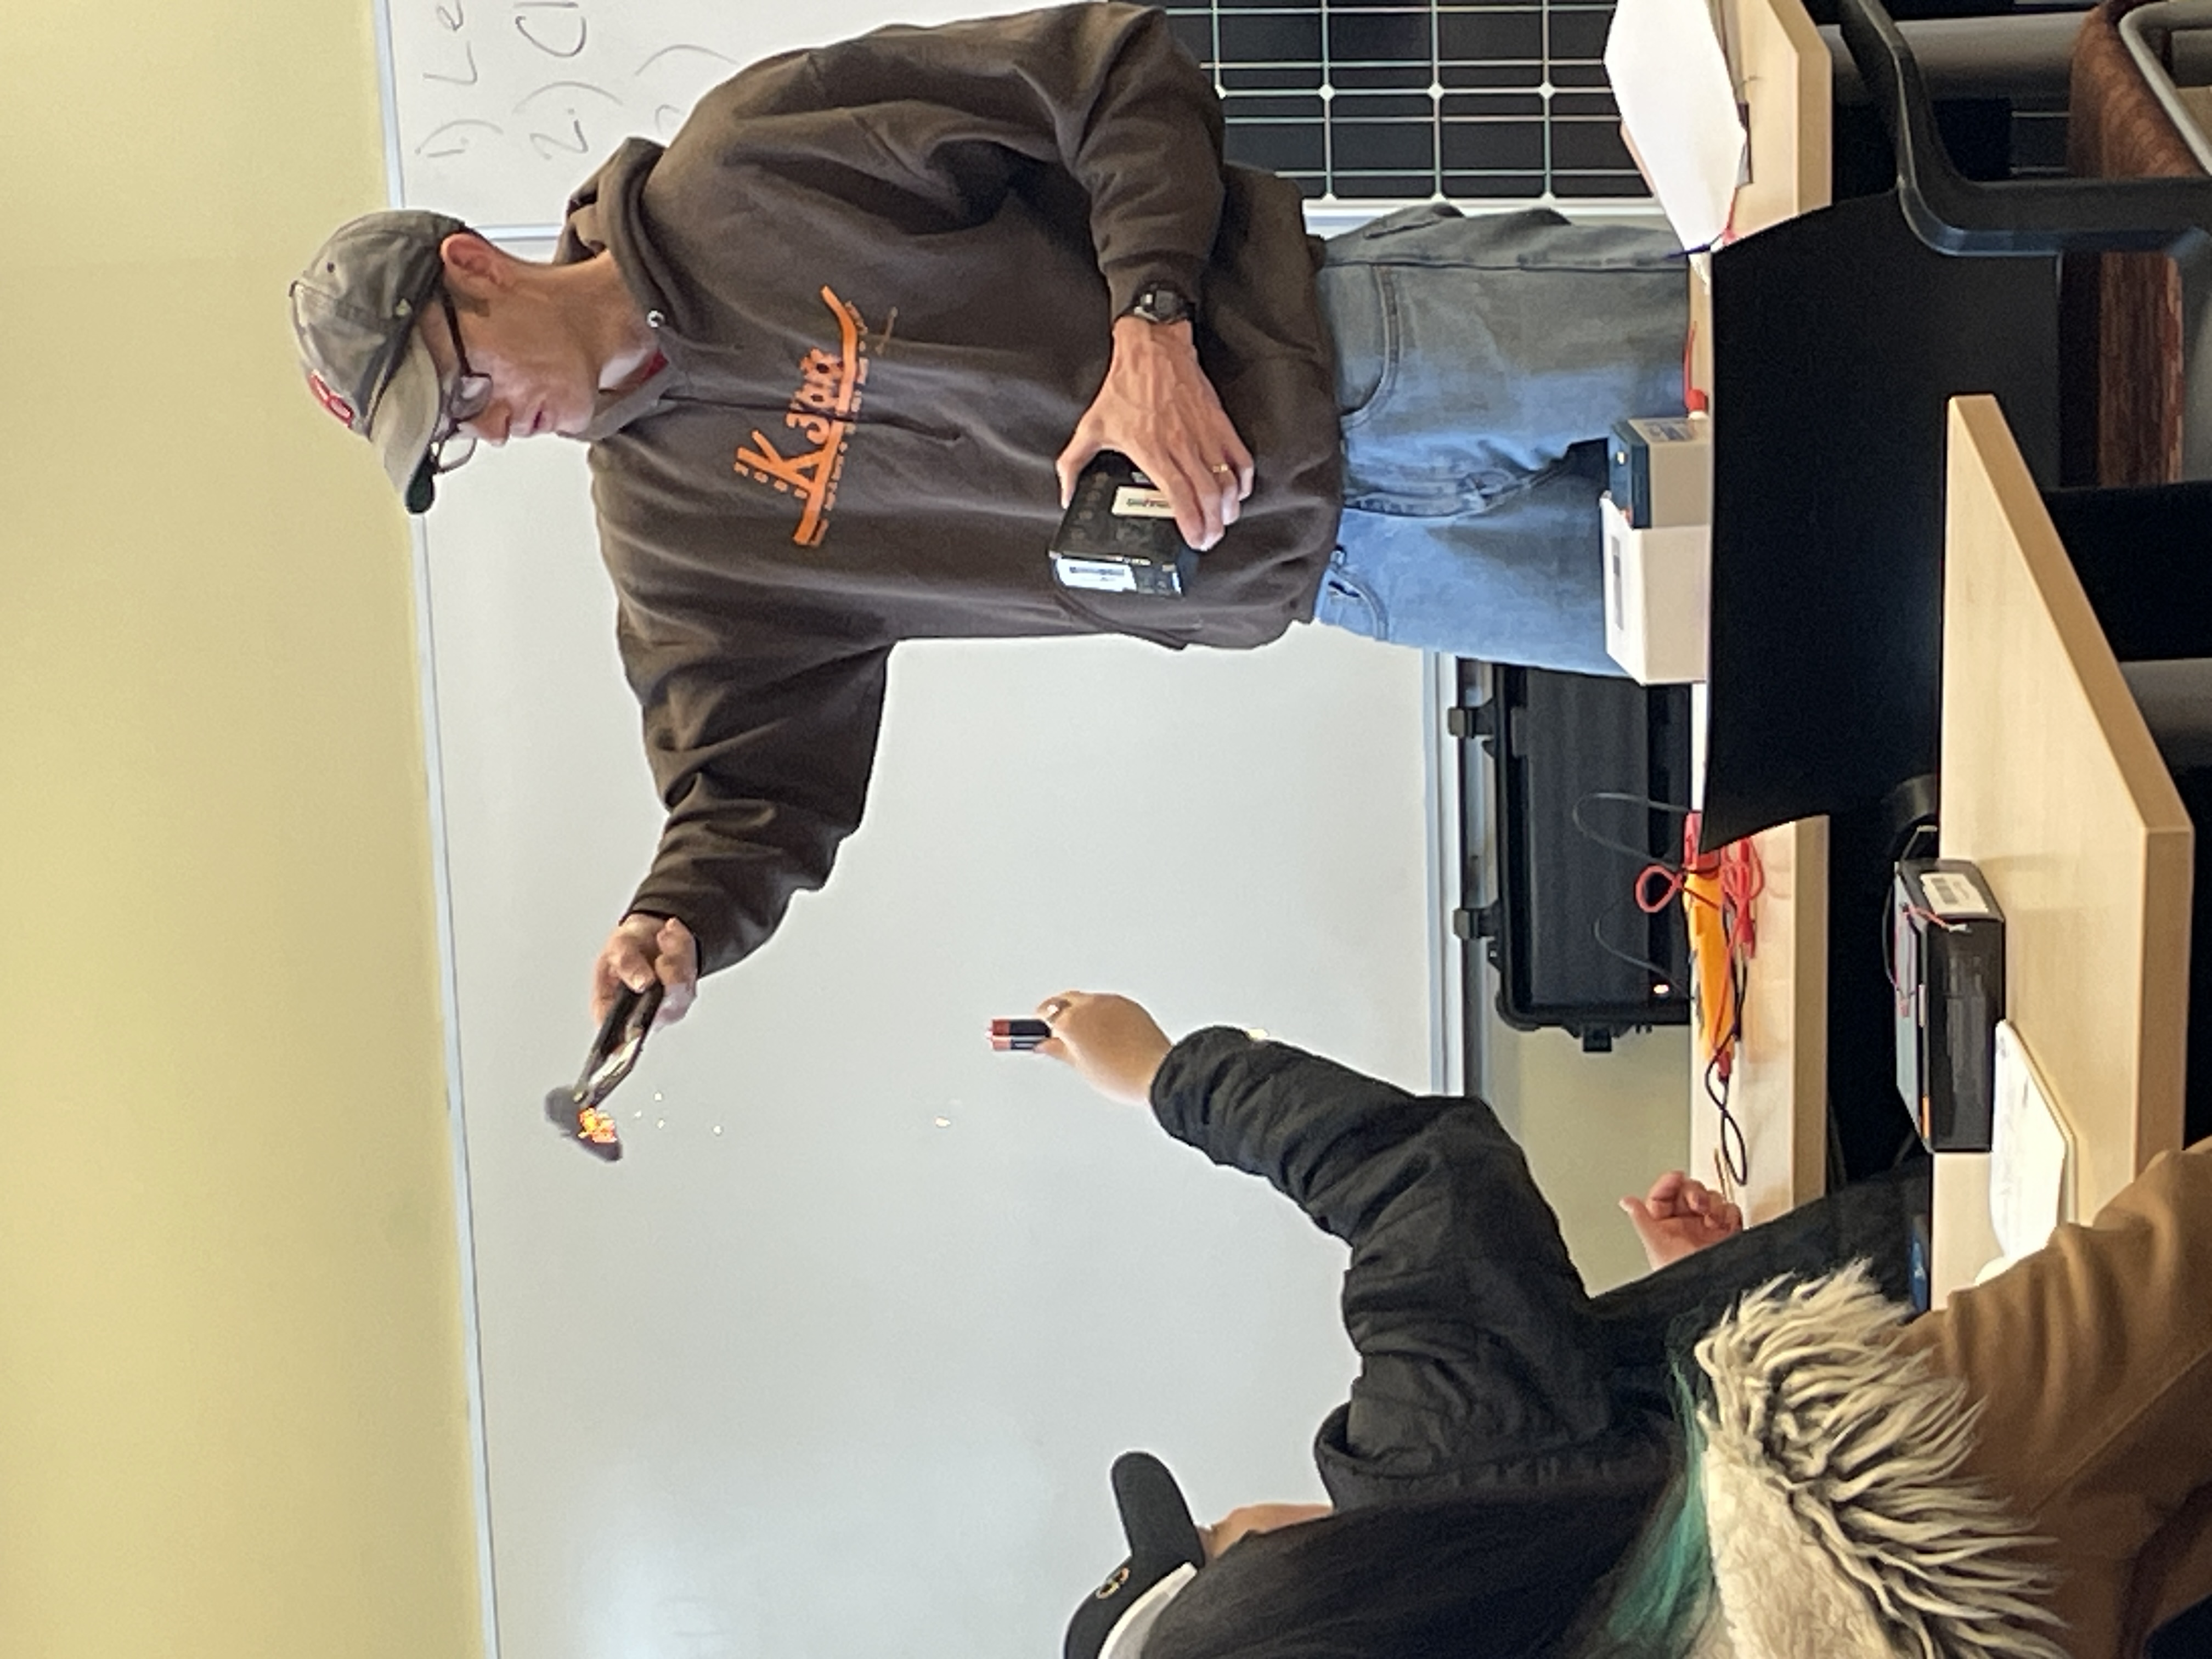 Chris Pike shows students what happens when one short-circuits a battery.